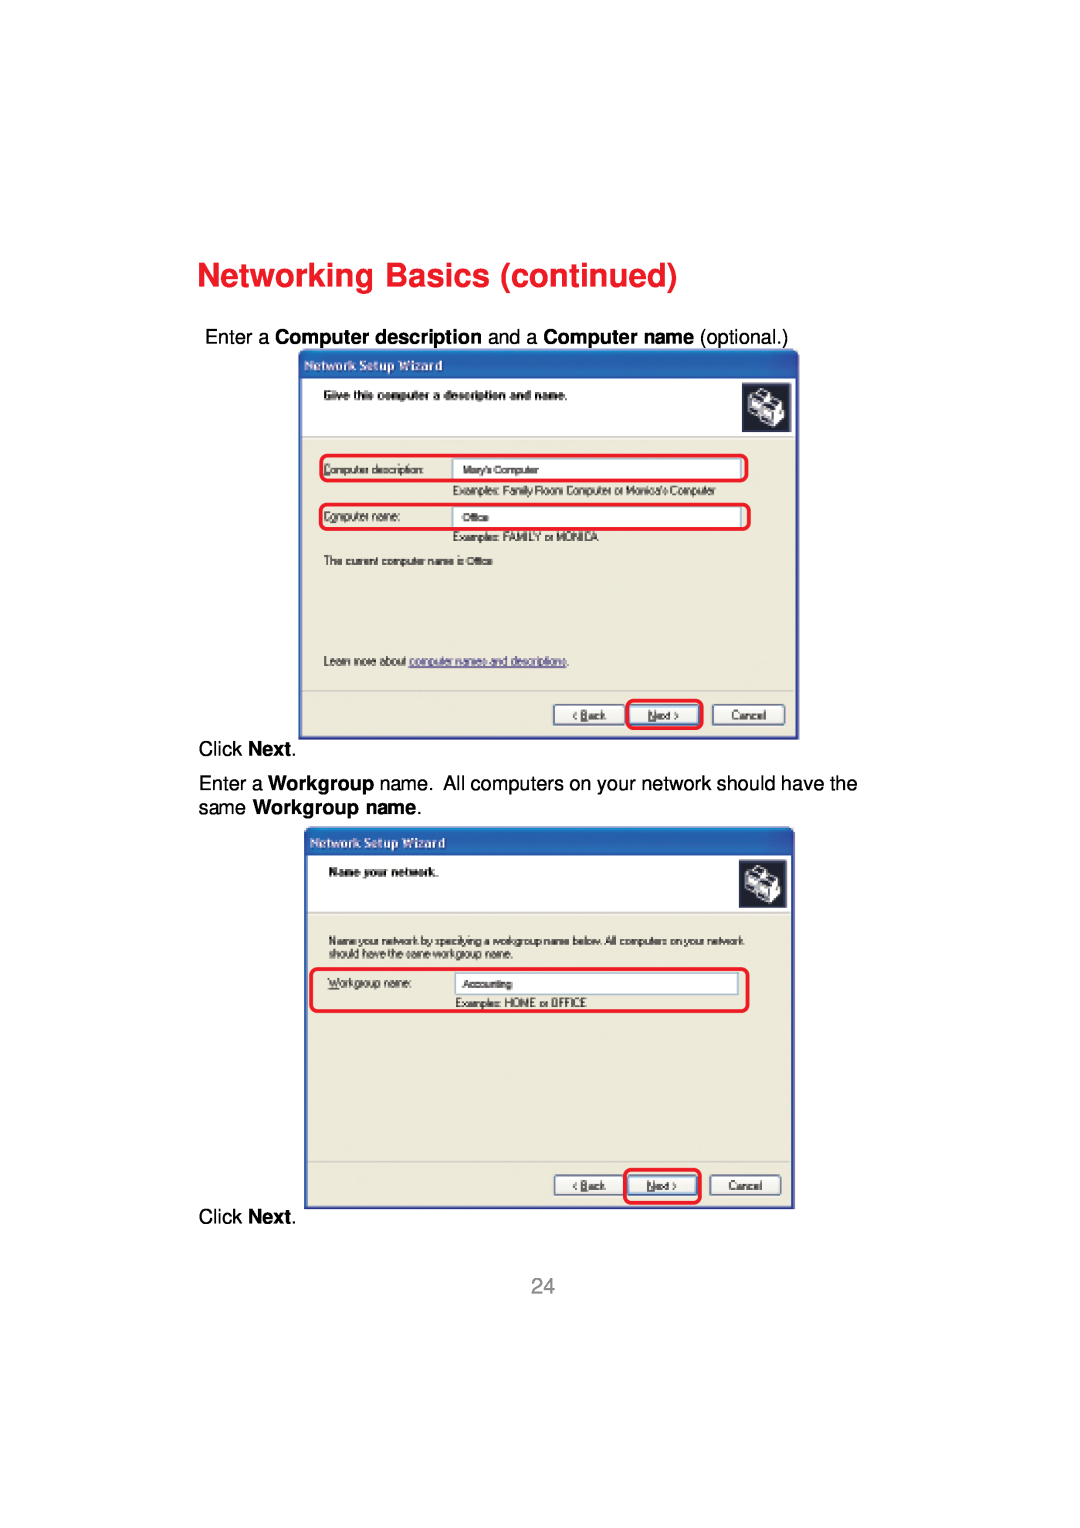 D-Link DWL-AG530 manual Networking Basics continued, Enter a Computer description and a Computer name optional 